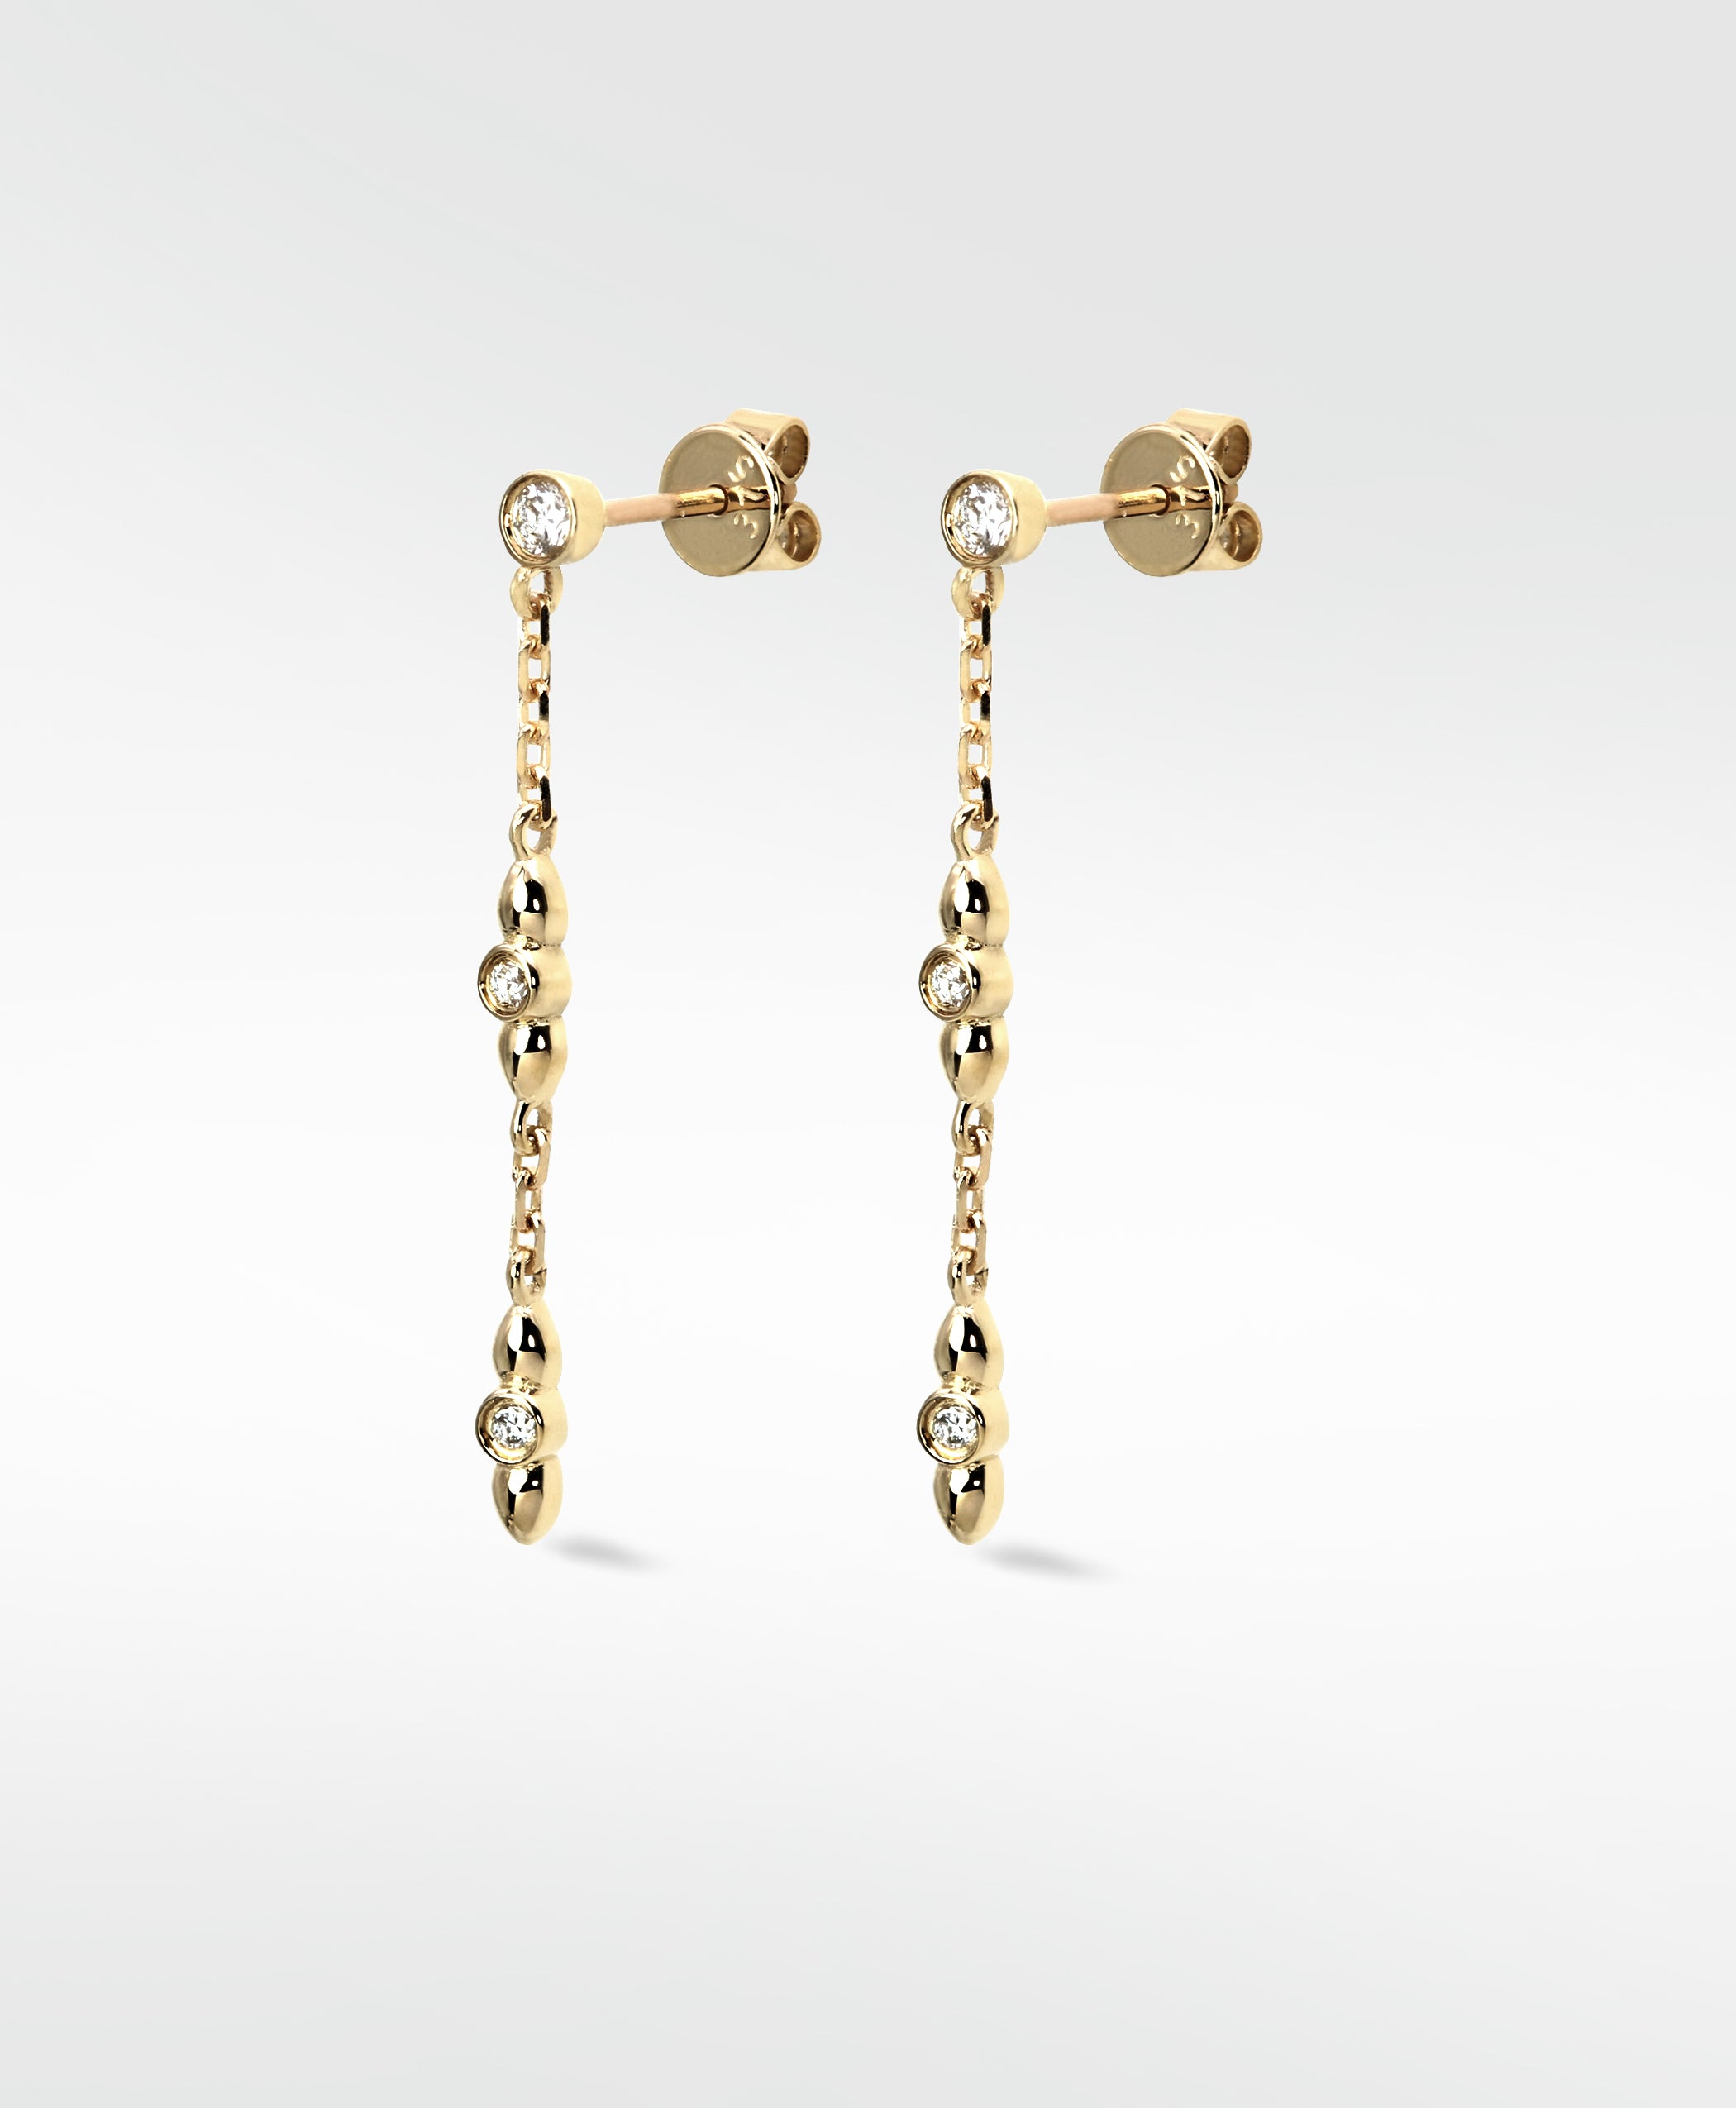 Passionflower Vine Gold Chain Earrings